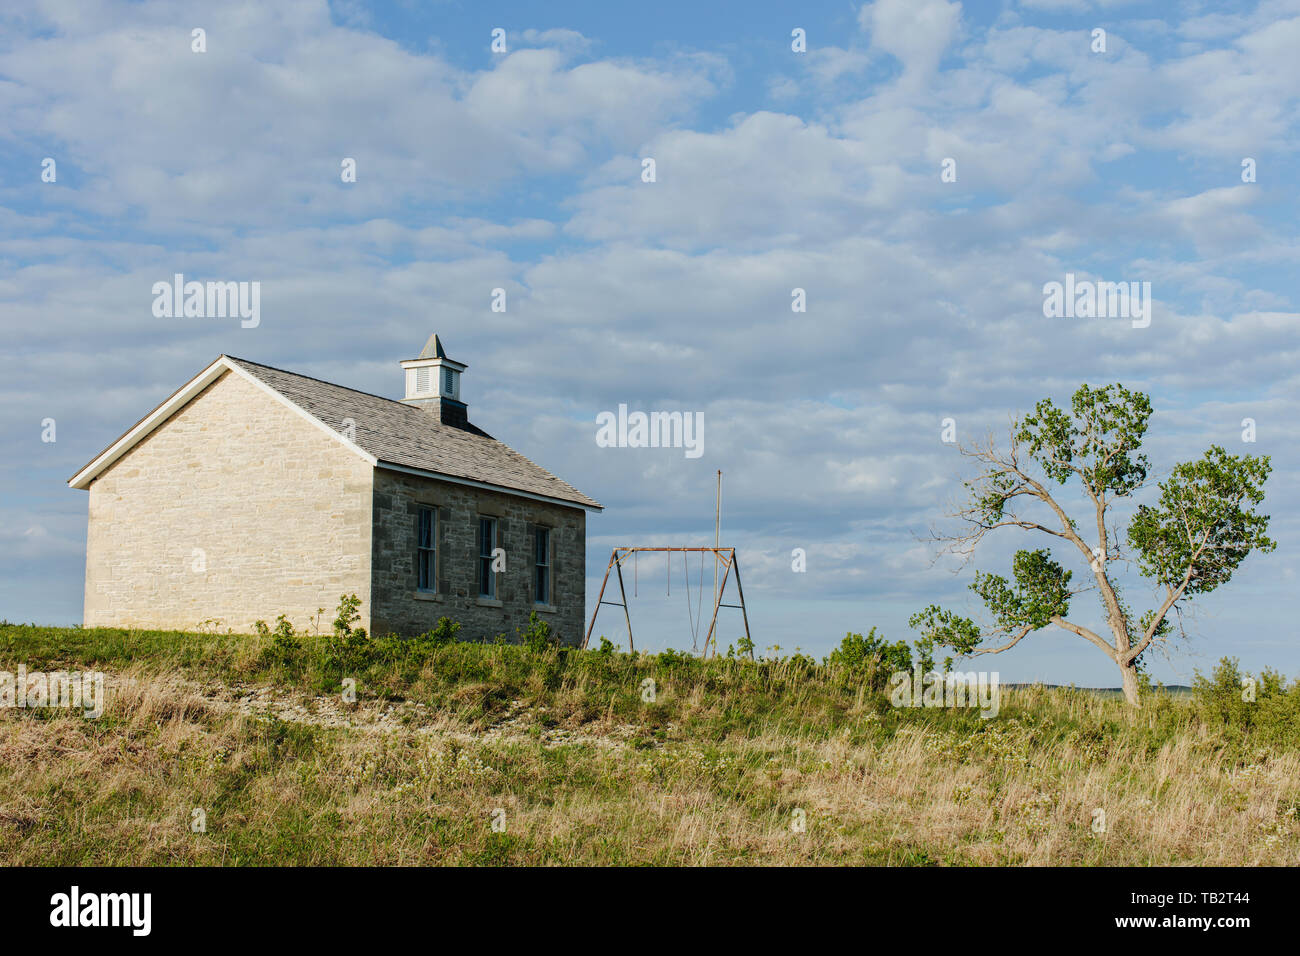 Tallgrass Prairie Preserve, a historic school house building and a cottonwood tree in spring. Stock Photo